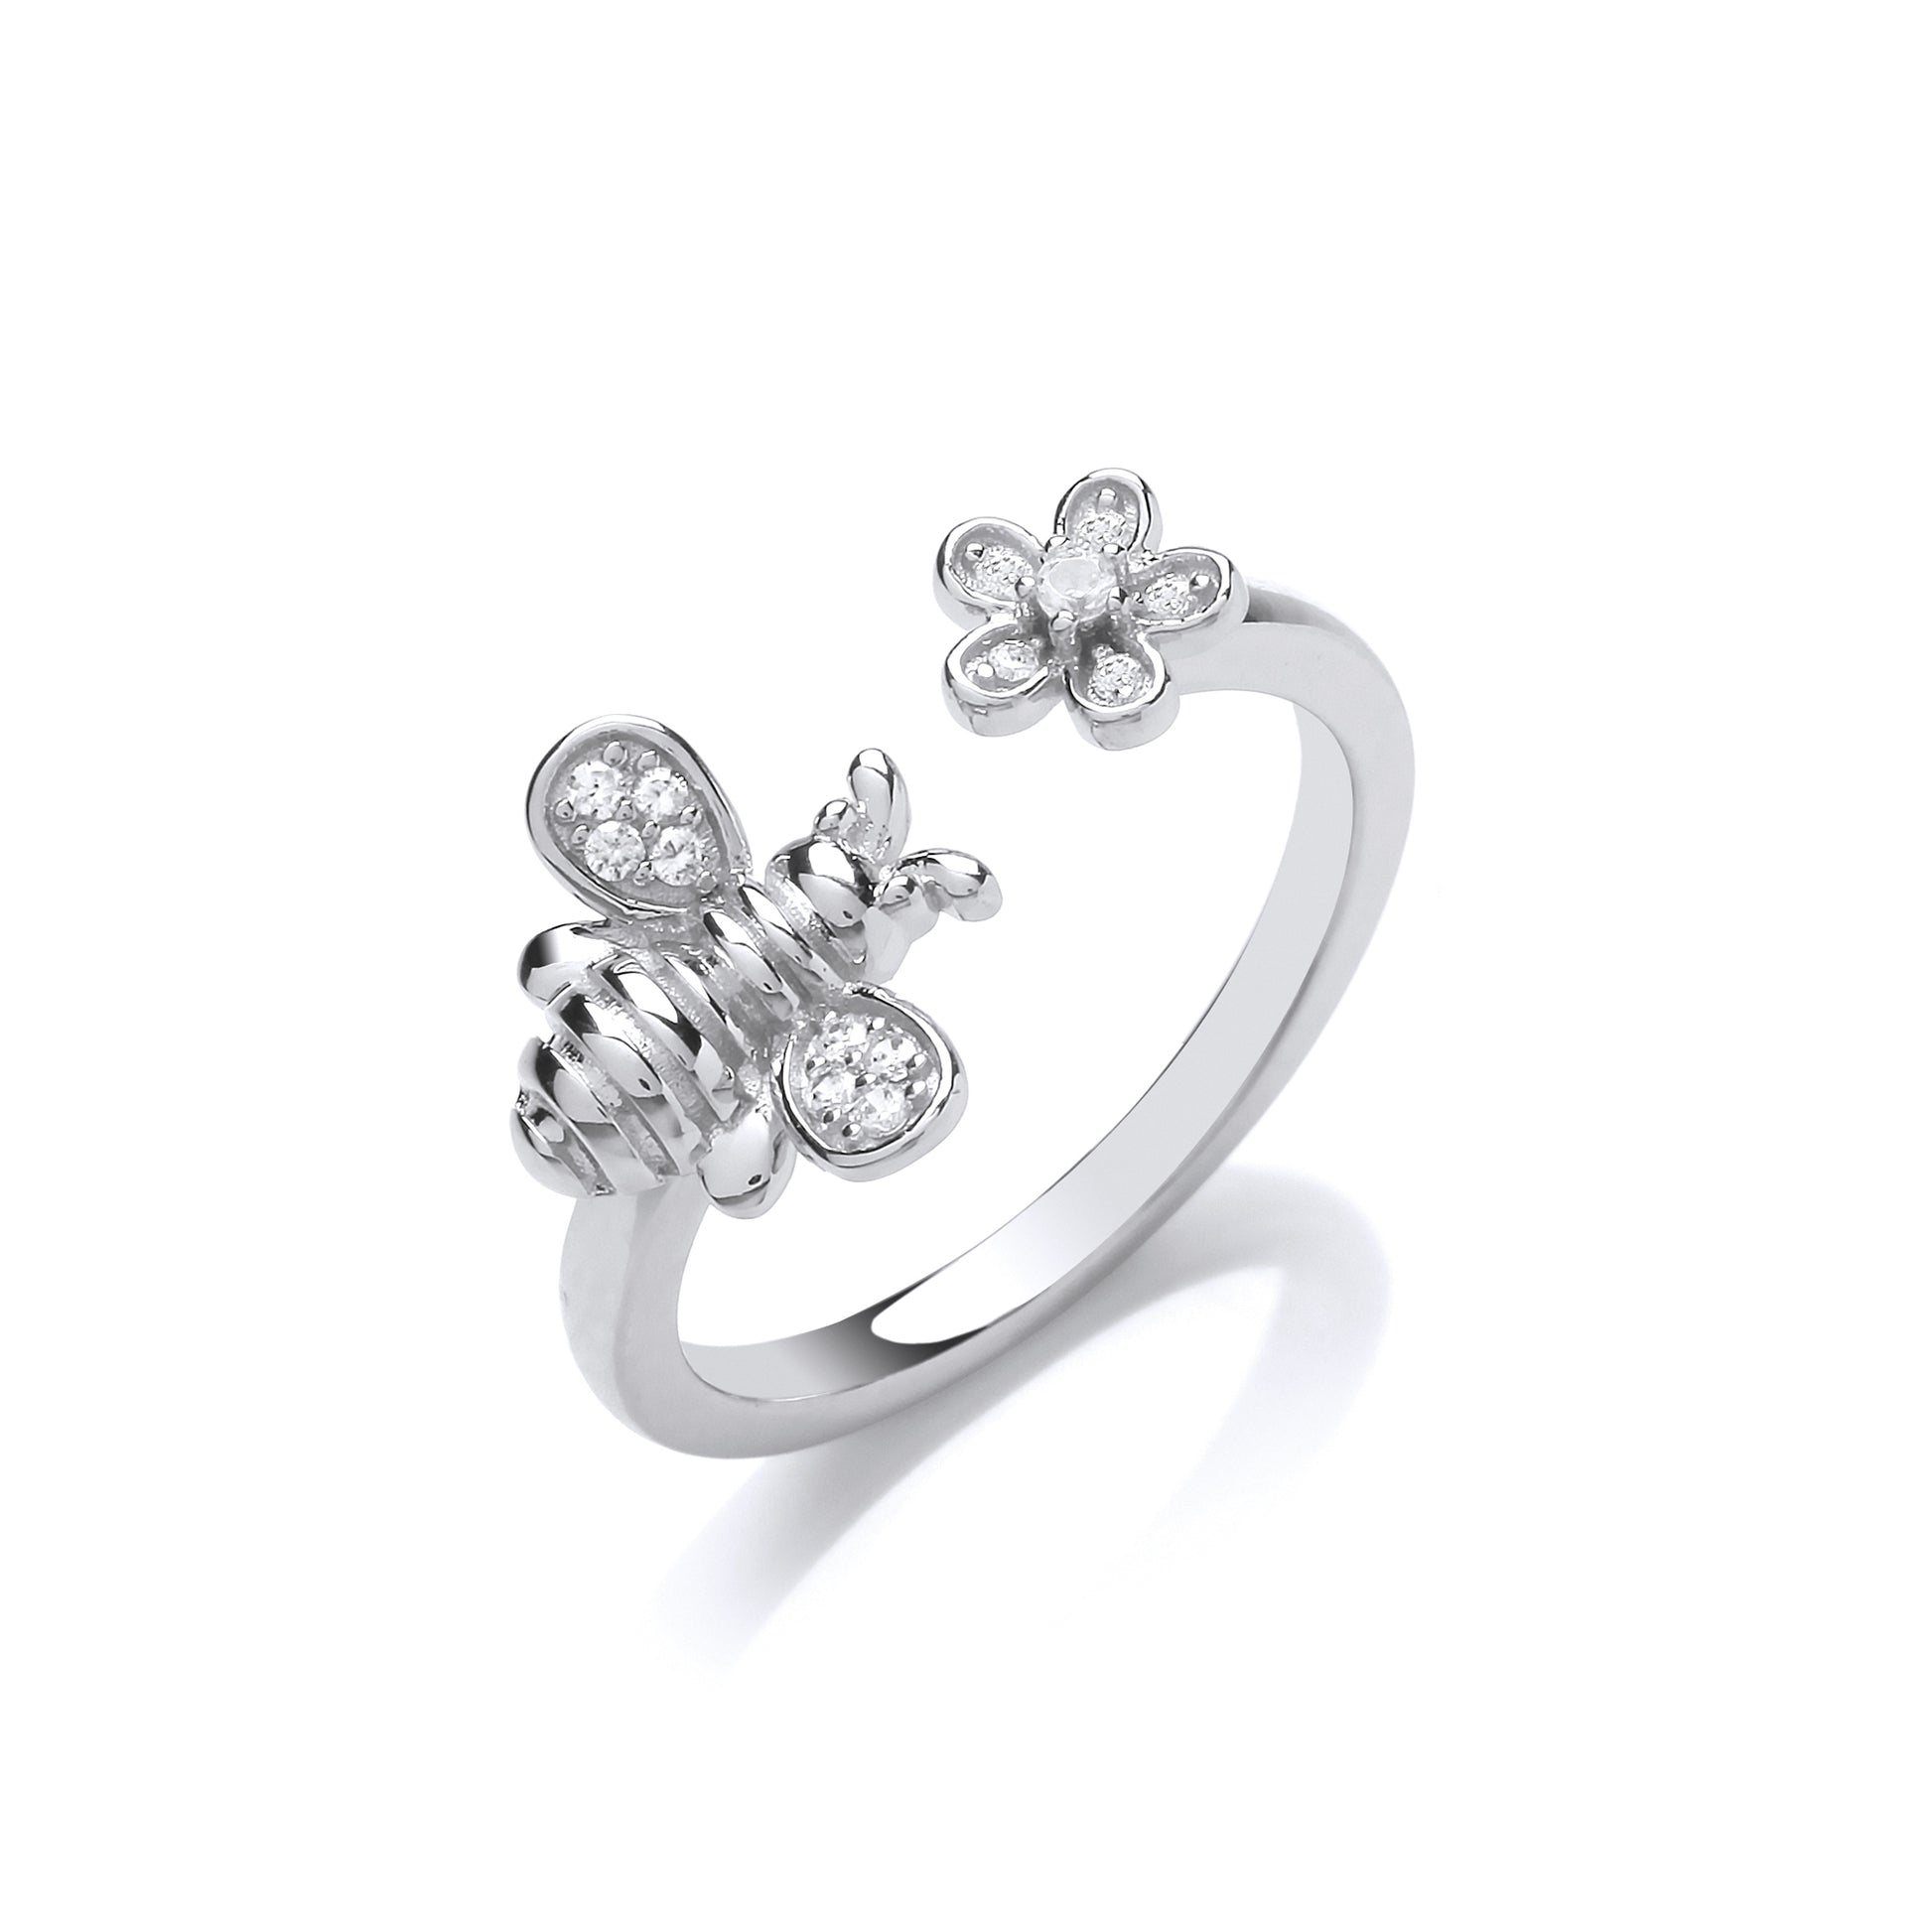 Silver  CZ Queen Bumble Honey Bee Cluster Ring - GVR870